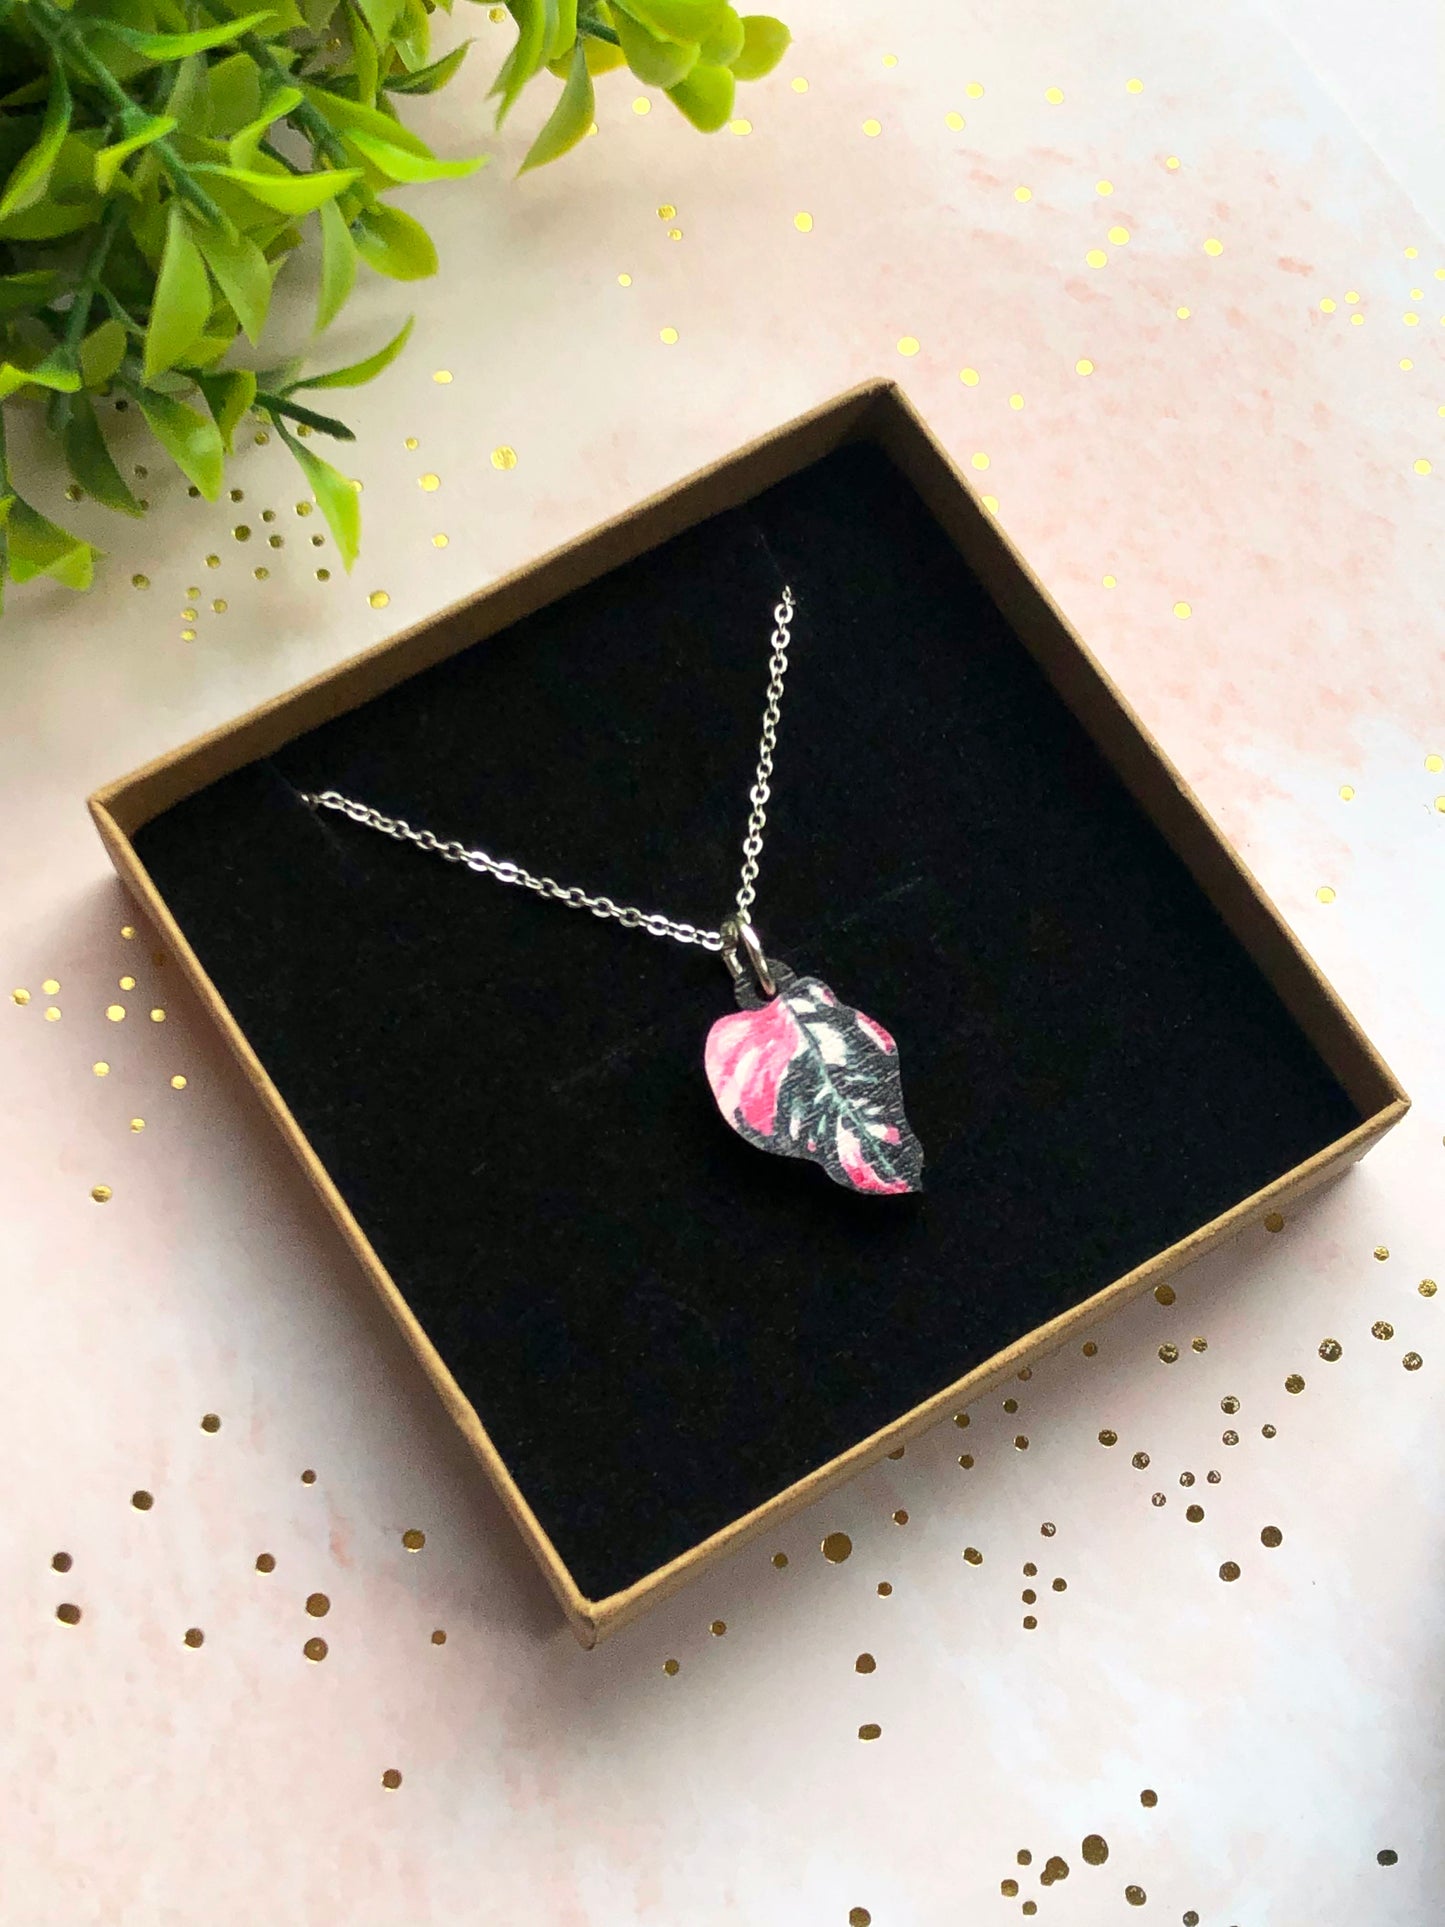 Plant Leaf Silver Plated Necklace Letterbox Gift Set